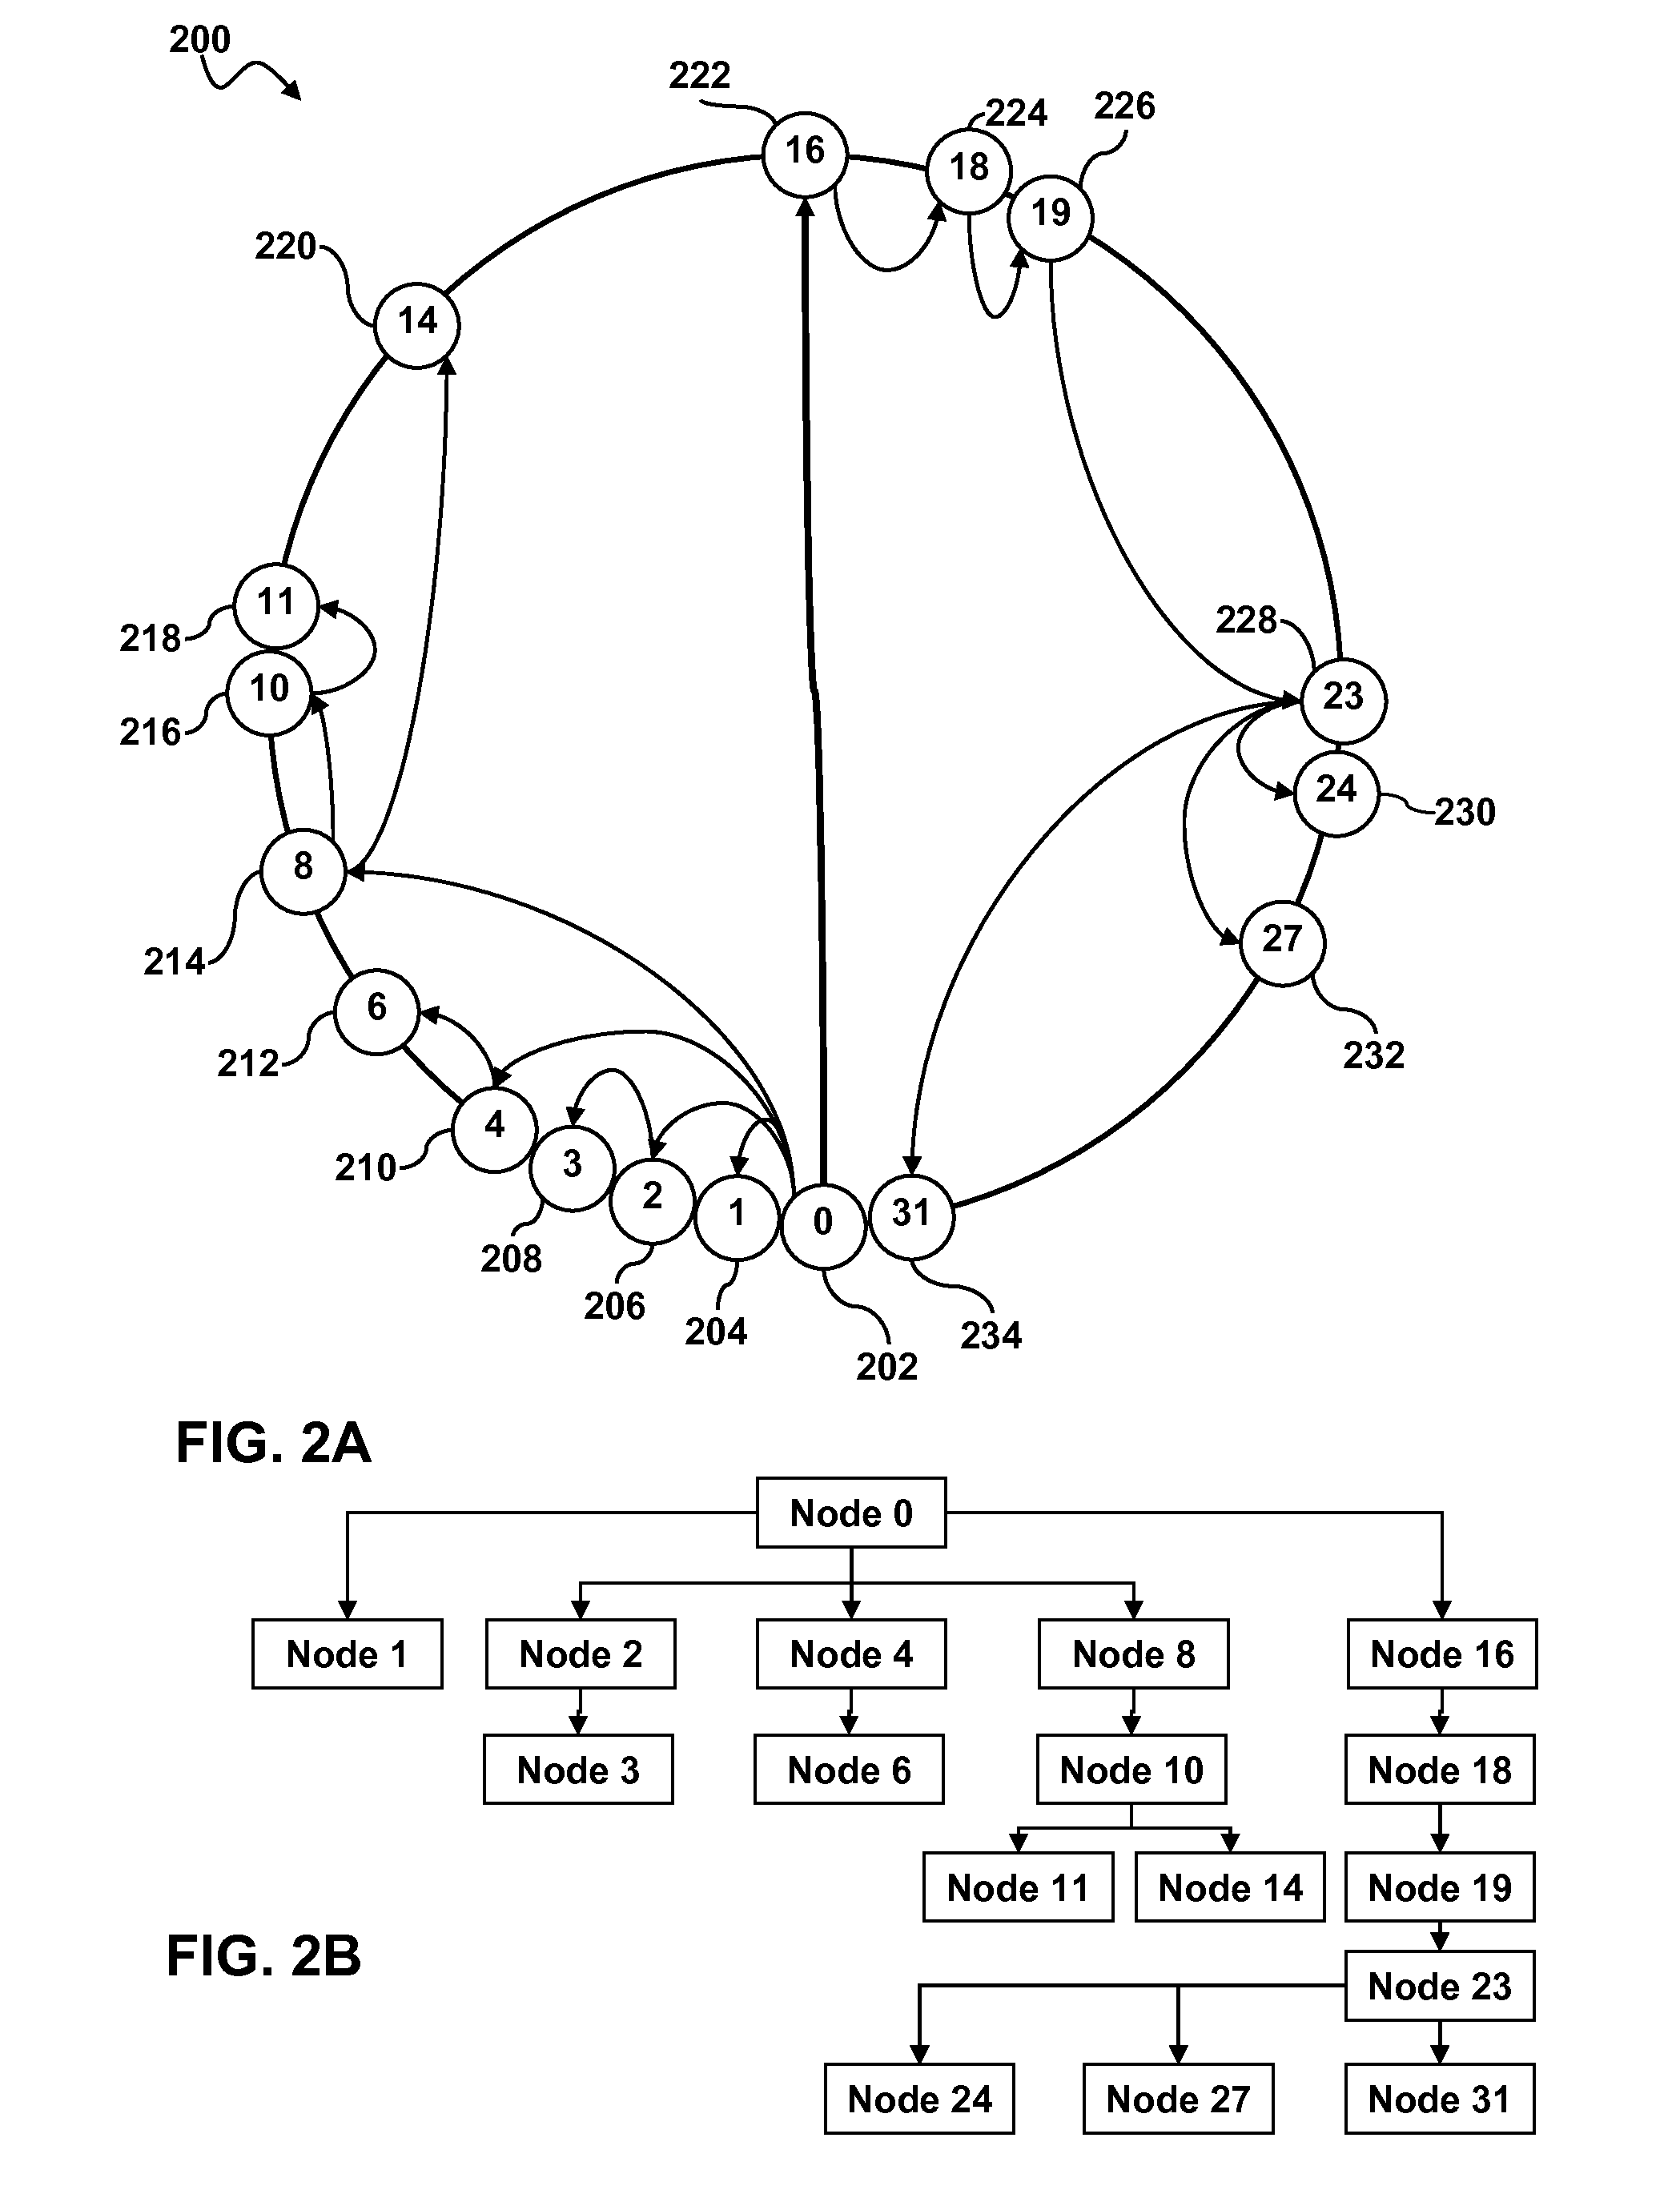 Application level broadcast in peer overlay network